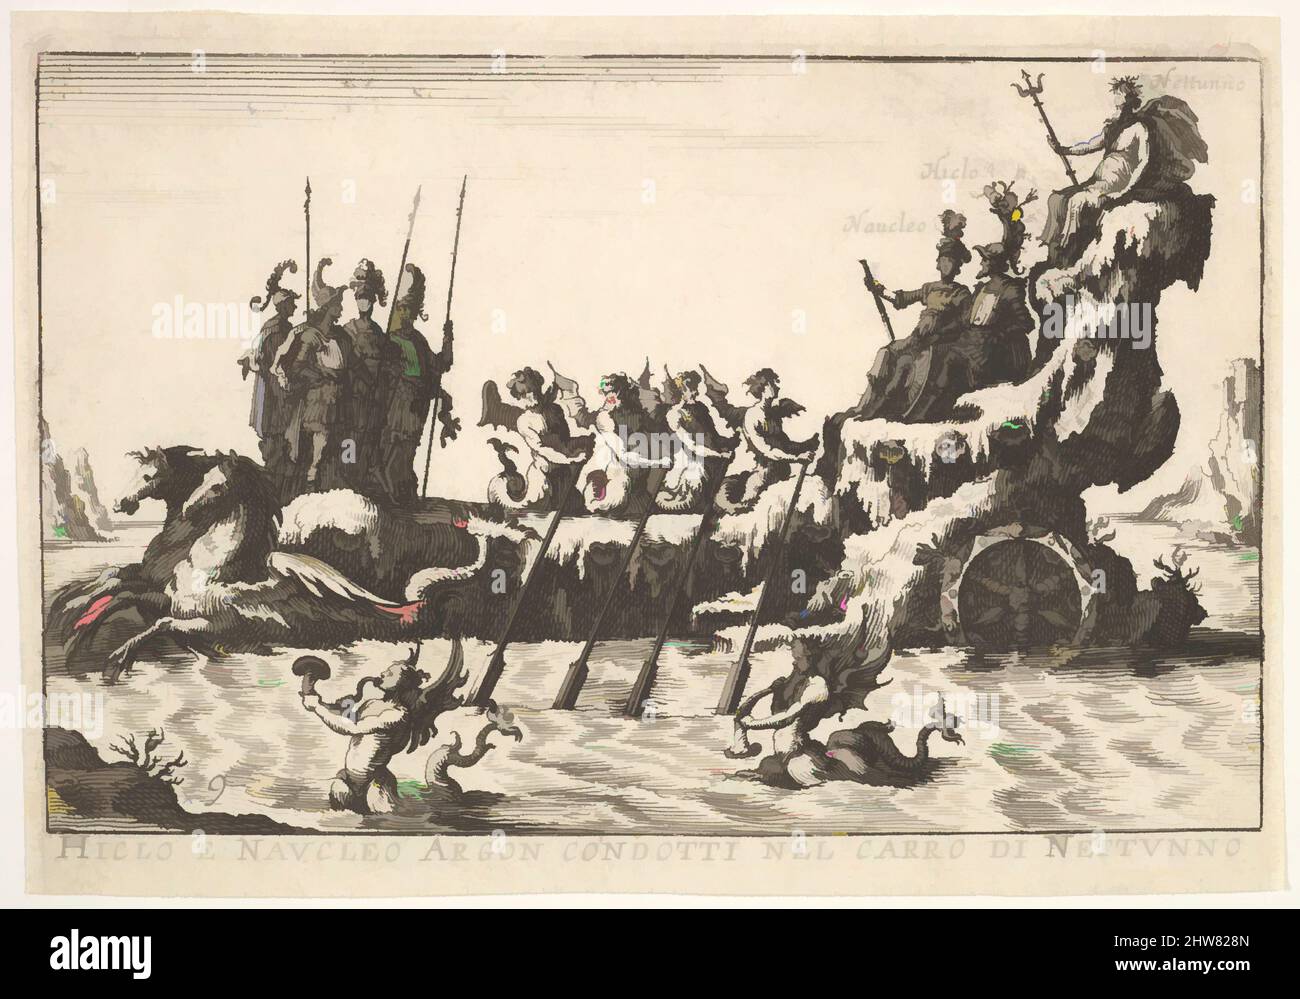 Plate 9: Argonauts Hicleus and Naucleus led in the float of Neptune (Hicleo e Naucleo Argon. condotti nel carro di Nattunno), with male sea creatures blowing horns from the water below, from the series 'The magnificent pageant on the river Arno in Florence for the marriage of the Grand Duke' (Le Magnifique carousel fait sur le fleuve de l'Arne a Florence, pour le mariage du Grand Duc), for the wedding celebration of Cosimo de' Medici in Florence, 1608, 1664, Etching, Sheet: 3 9/16 x 5 in. (9 x 12.7 cm), After Remigio Cantagallina (Italian, Borgo Sansepolcro ca. 1582–1656 Florence) Stock Photo